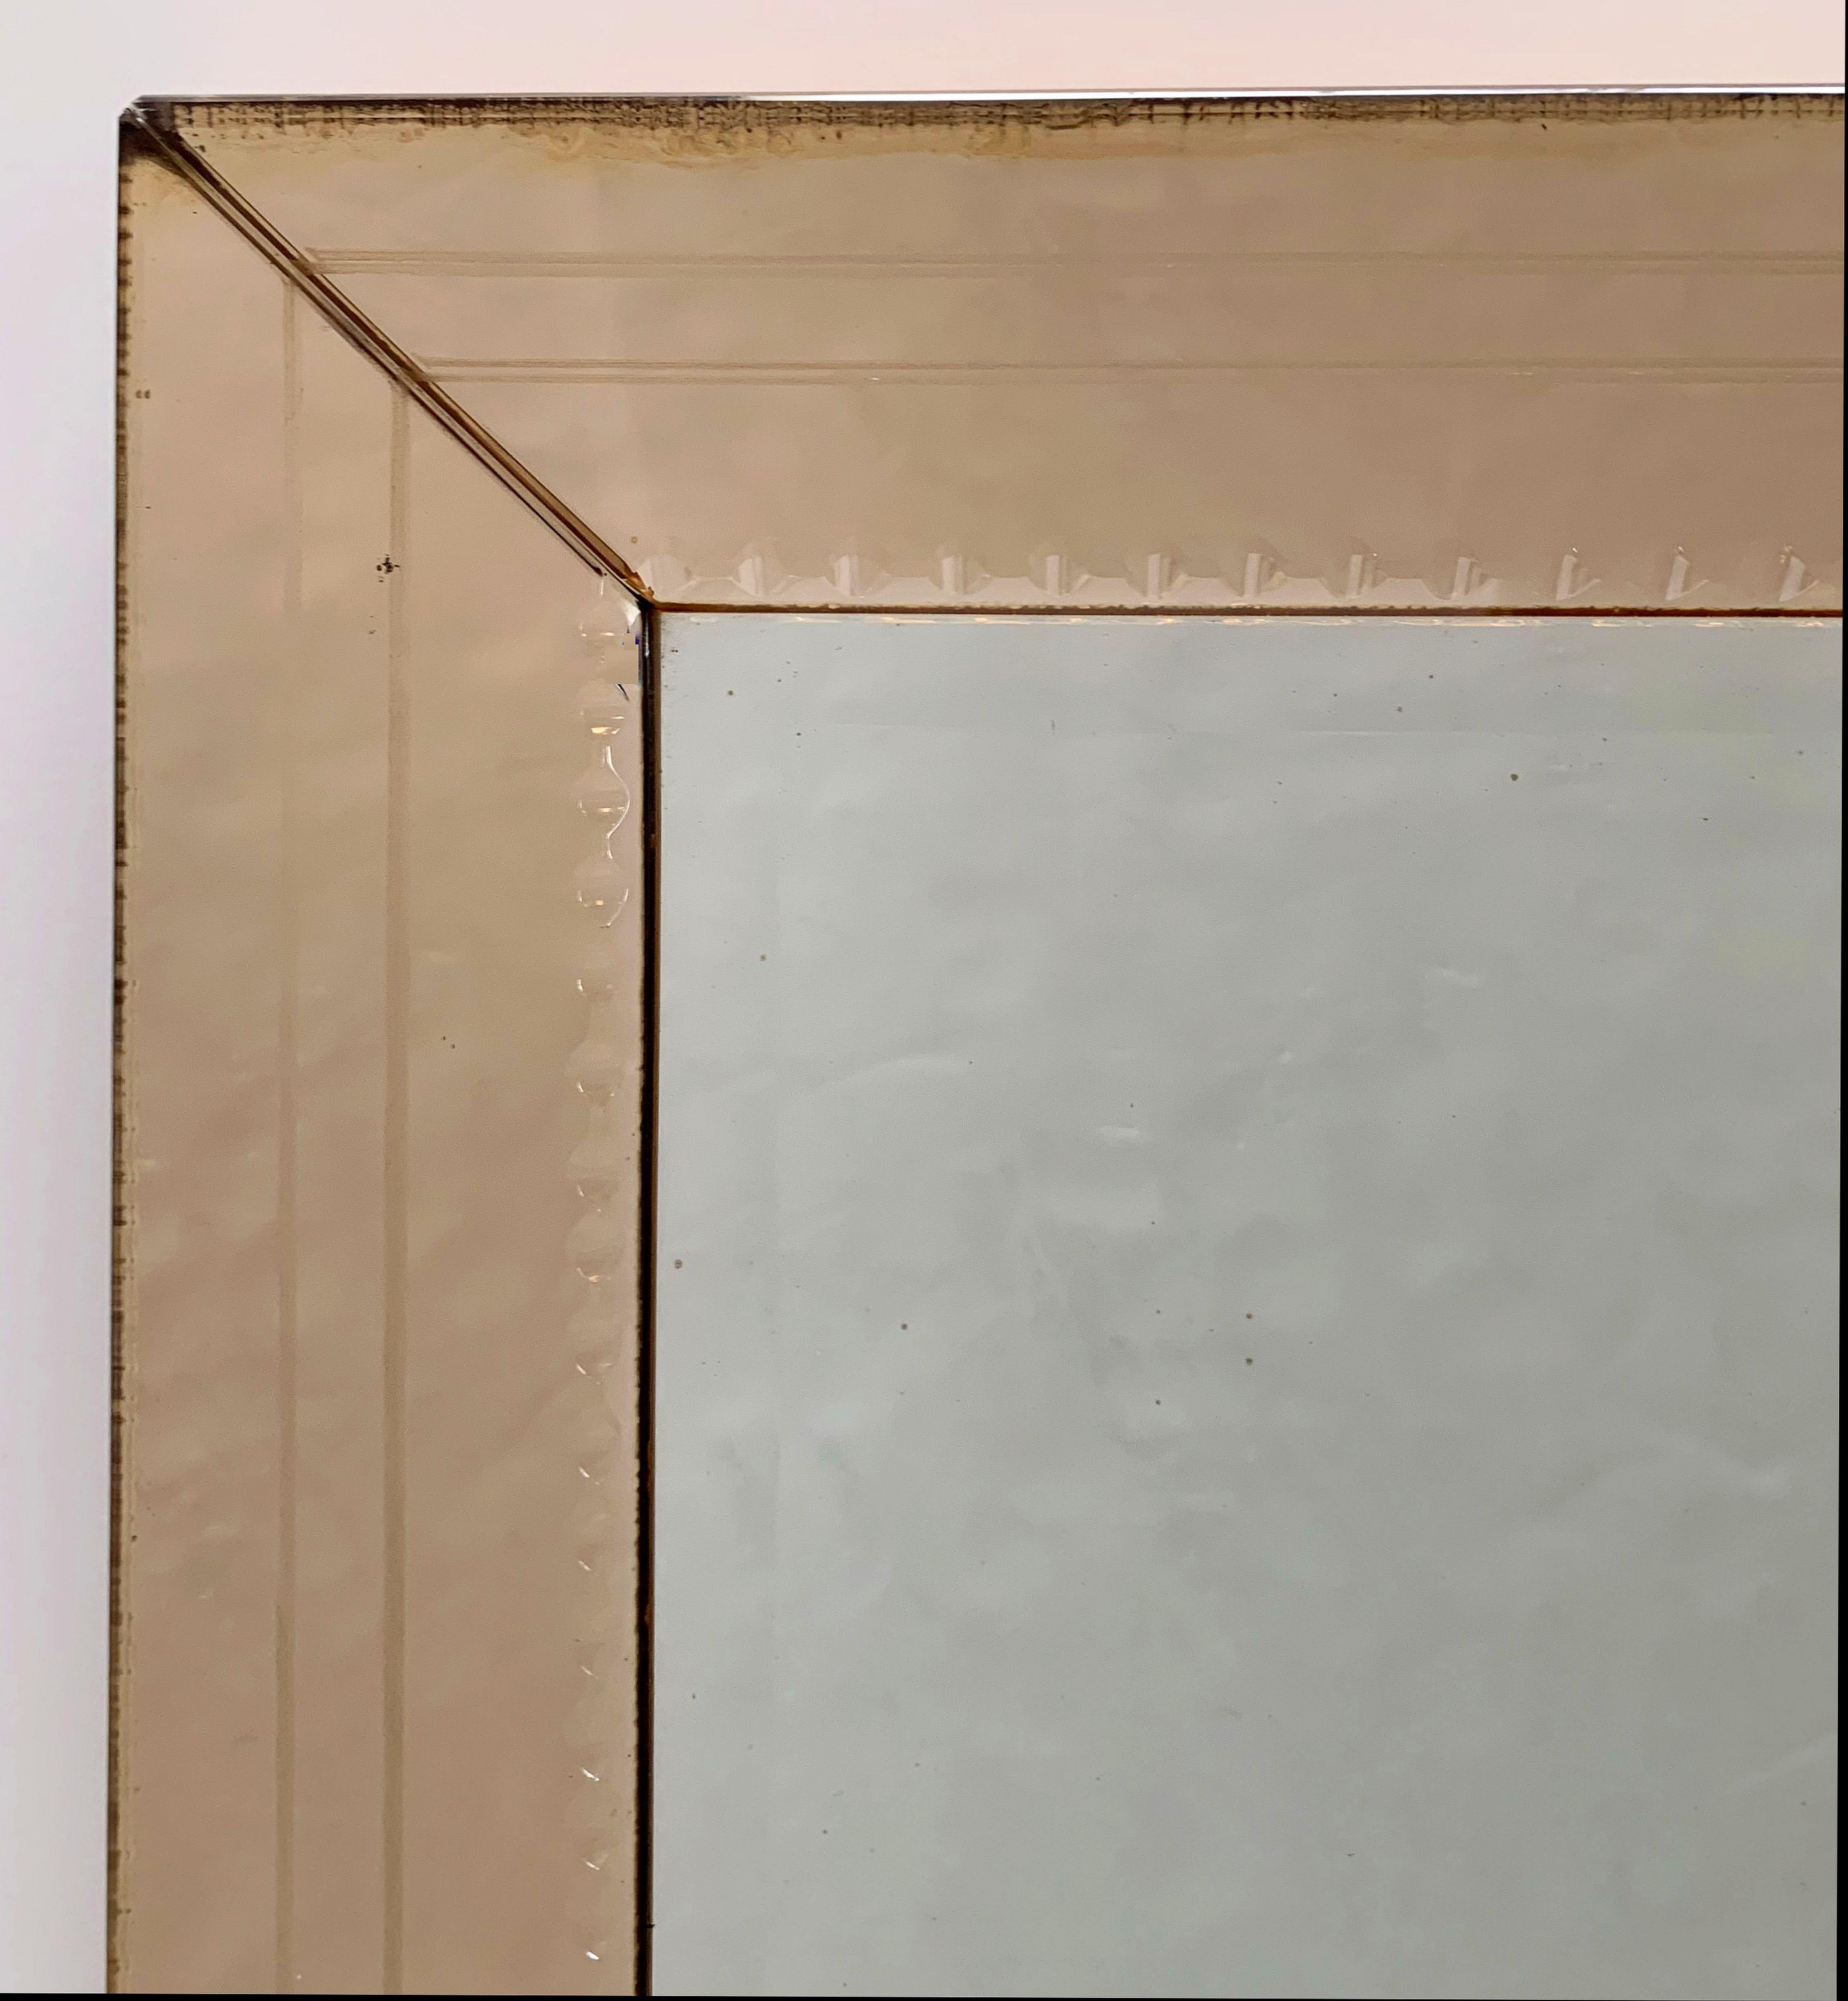 20th Century Art Deco Mirror with Beveled Frame of Copper-Colored Glass (H 58 3/4 x W 19 3/4)